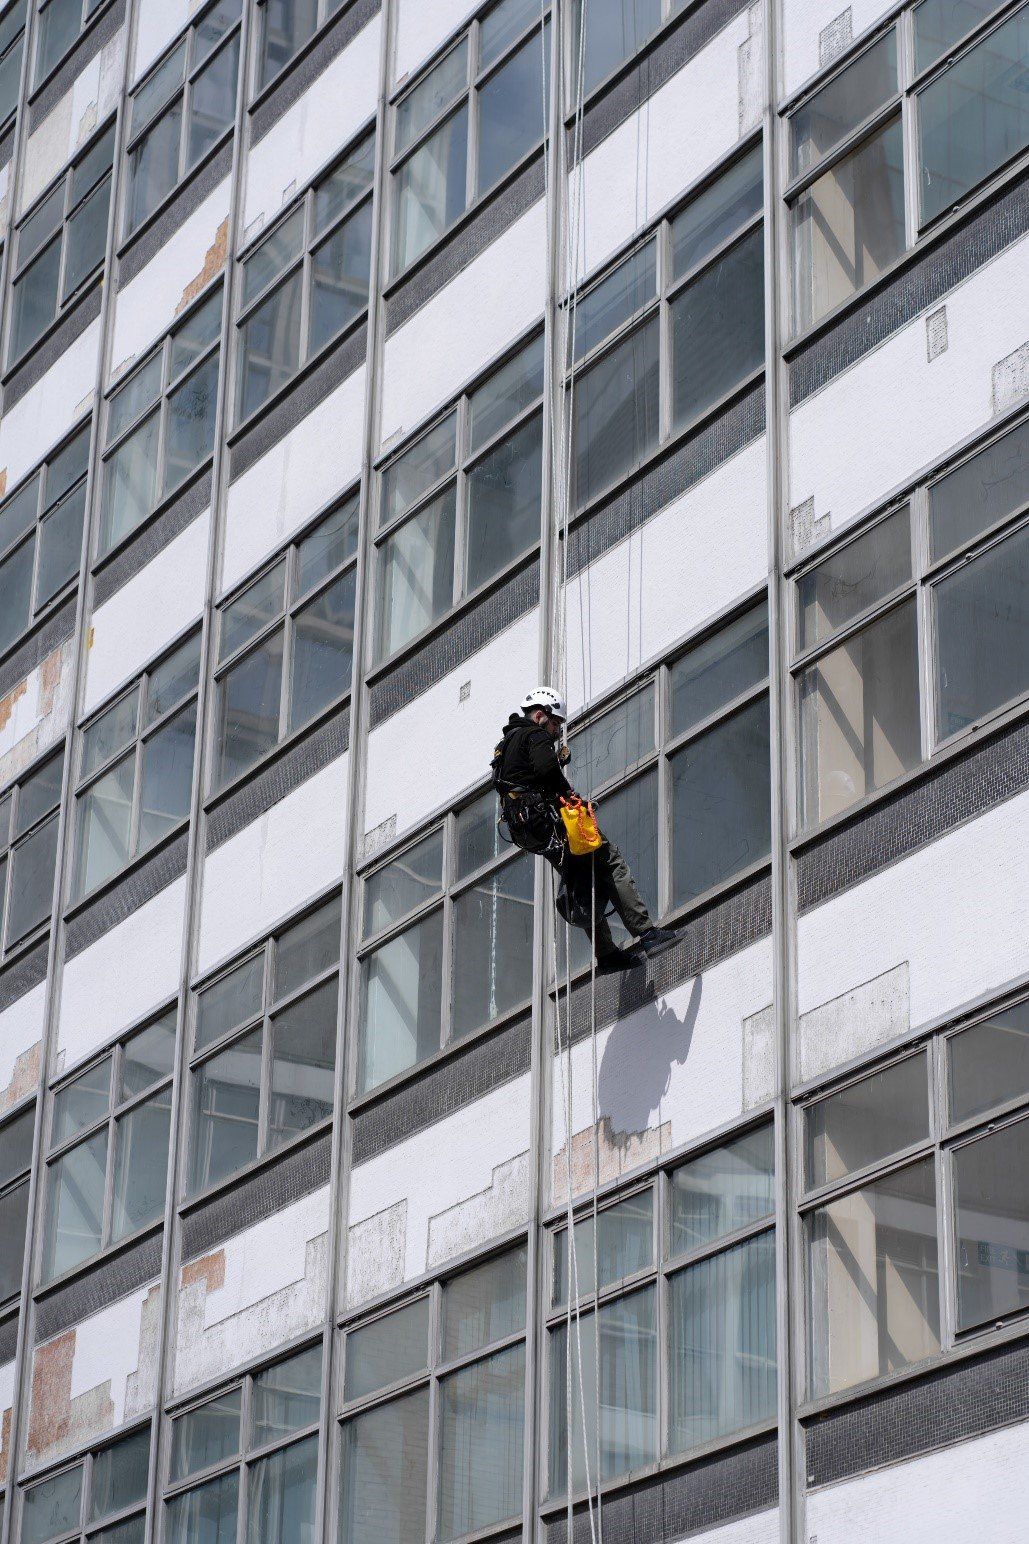 A worker hanging on the building